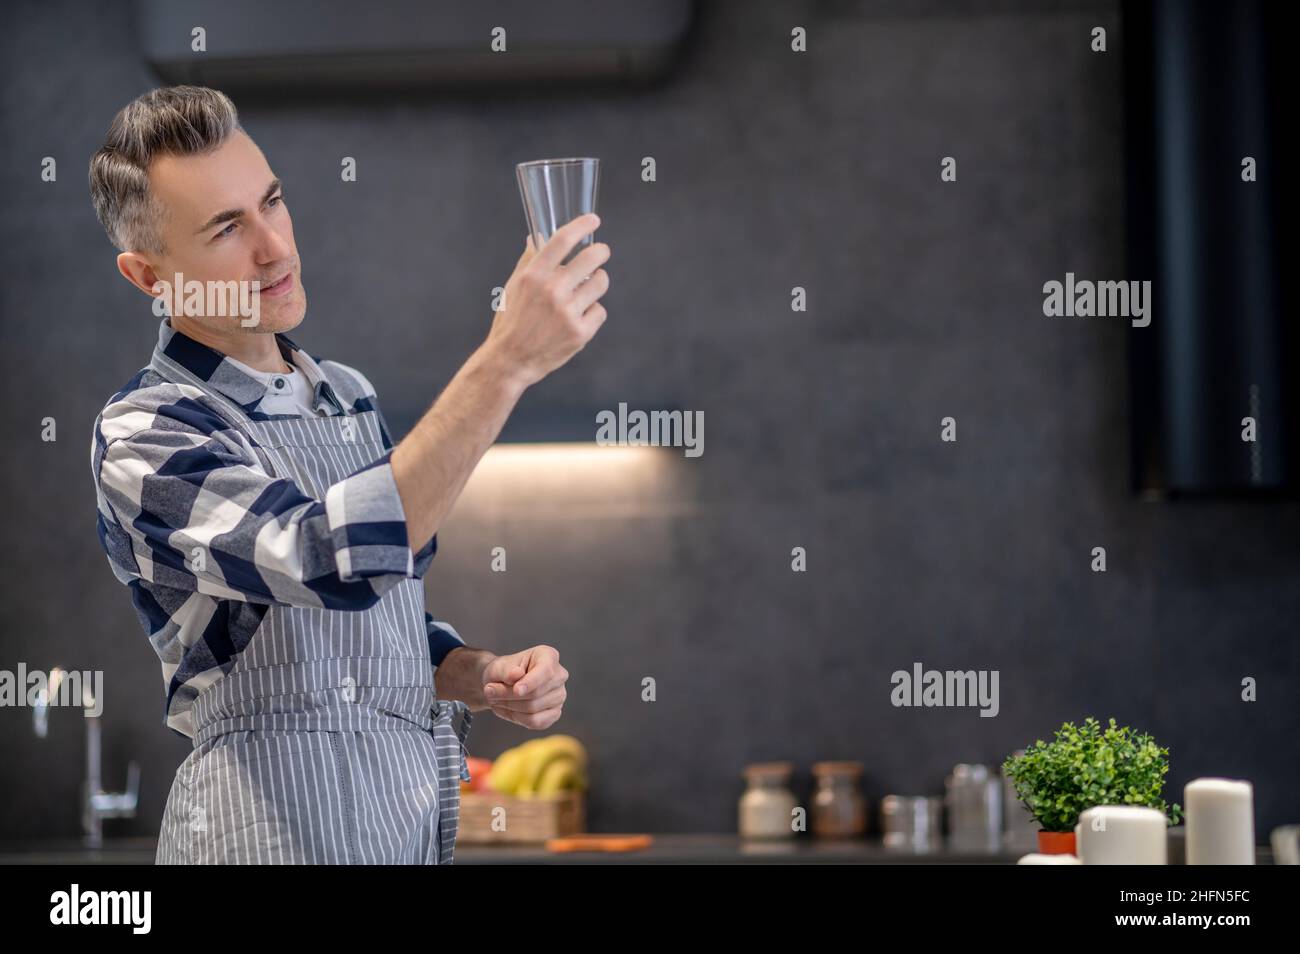 Man looking at glass in outstretched hand Stock Photo